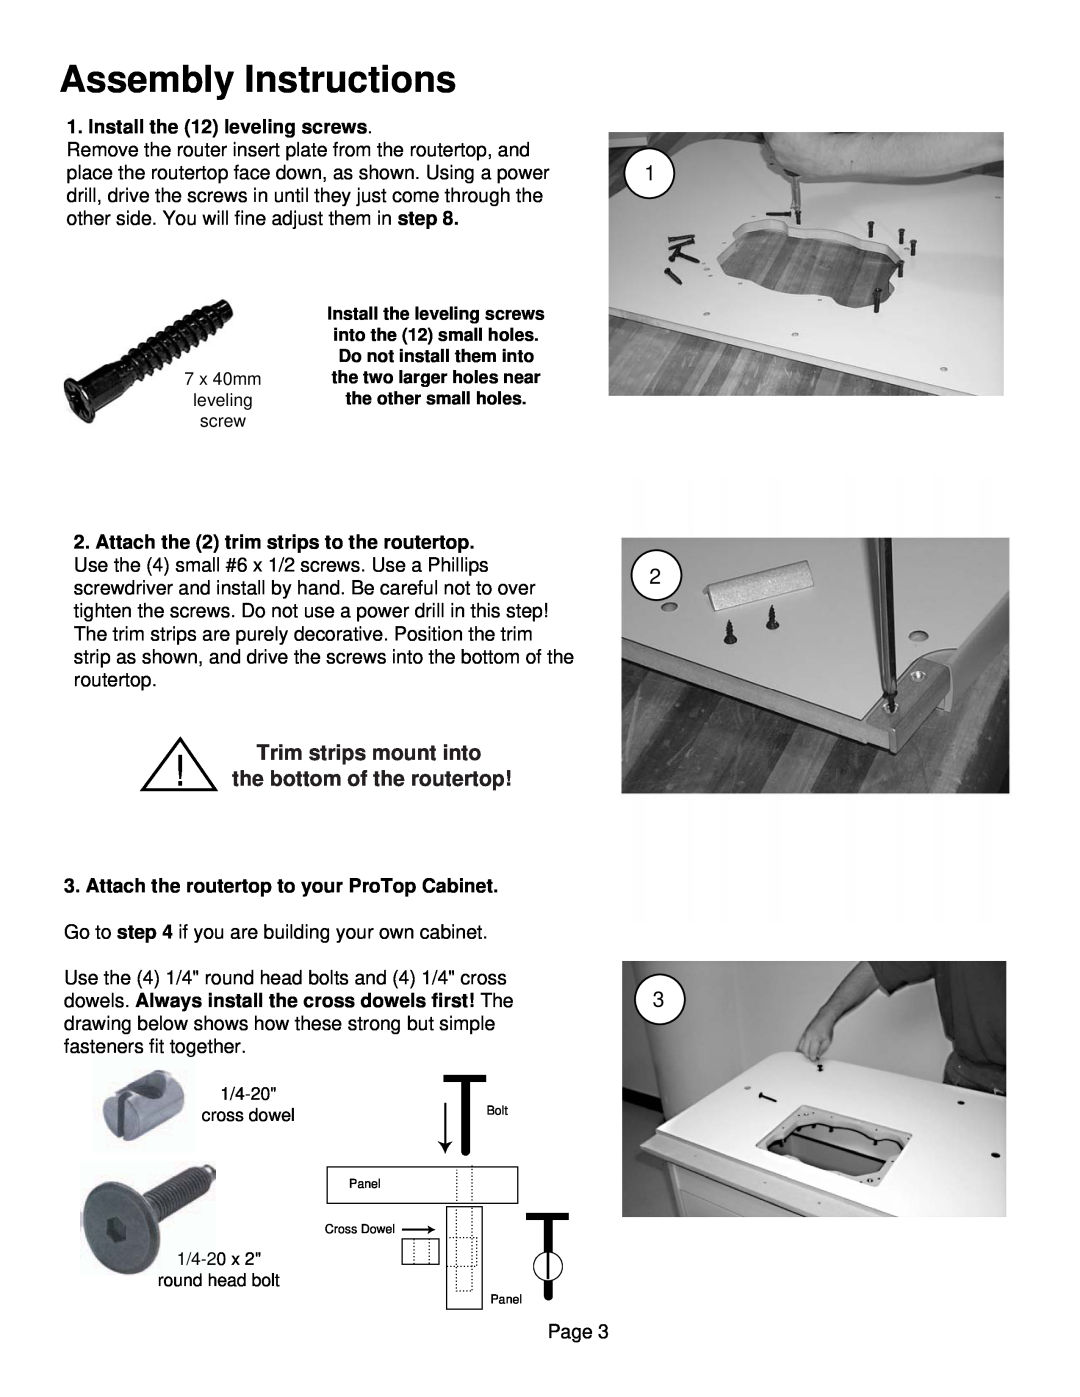 Bench Dog Tools RT400 manual Assembly Instructions, Trim strips mount into the bottom of the routertop 